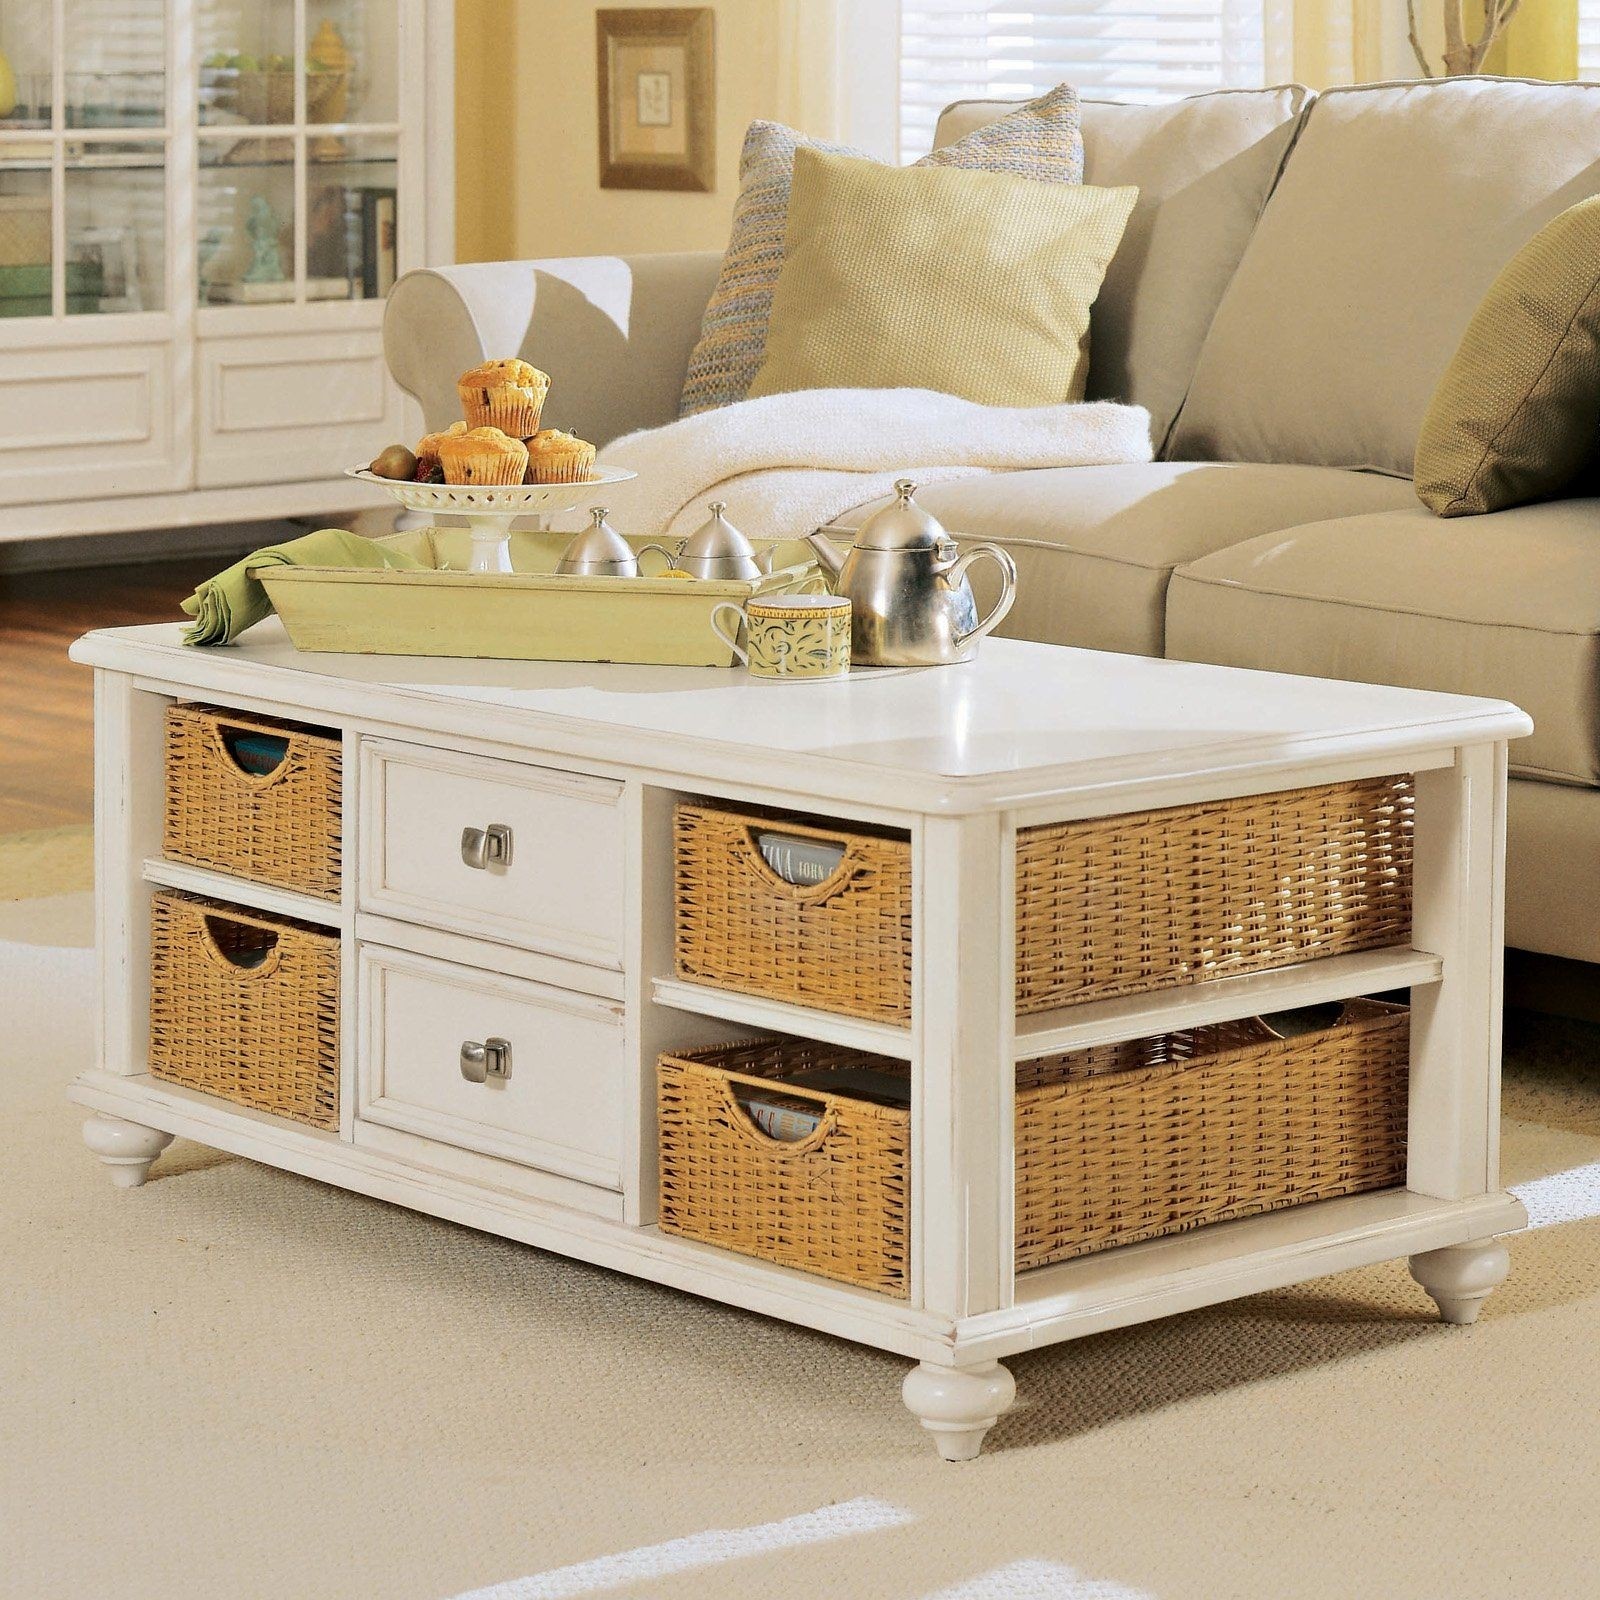 White coffee table with storage